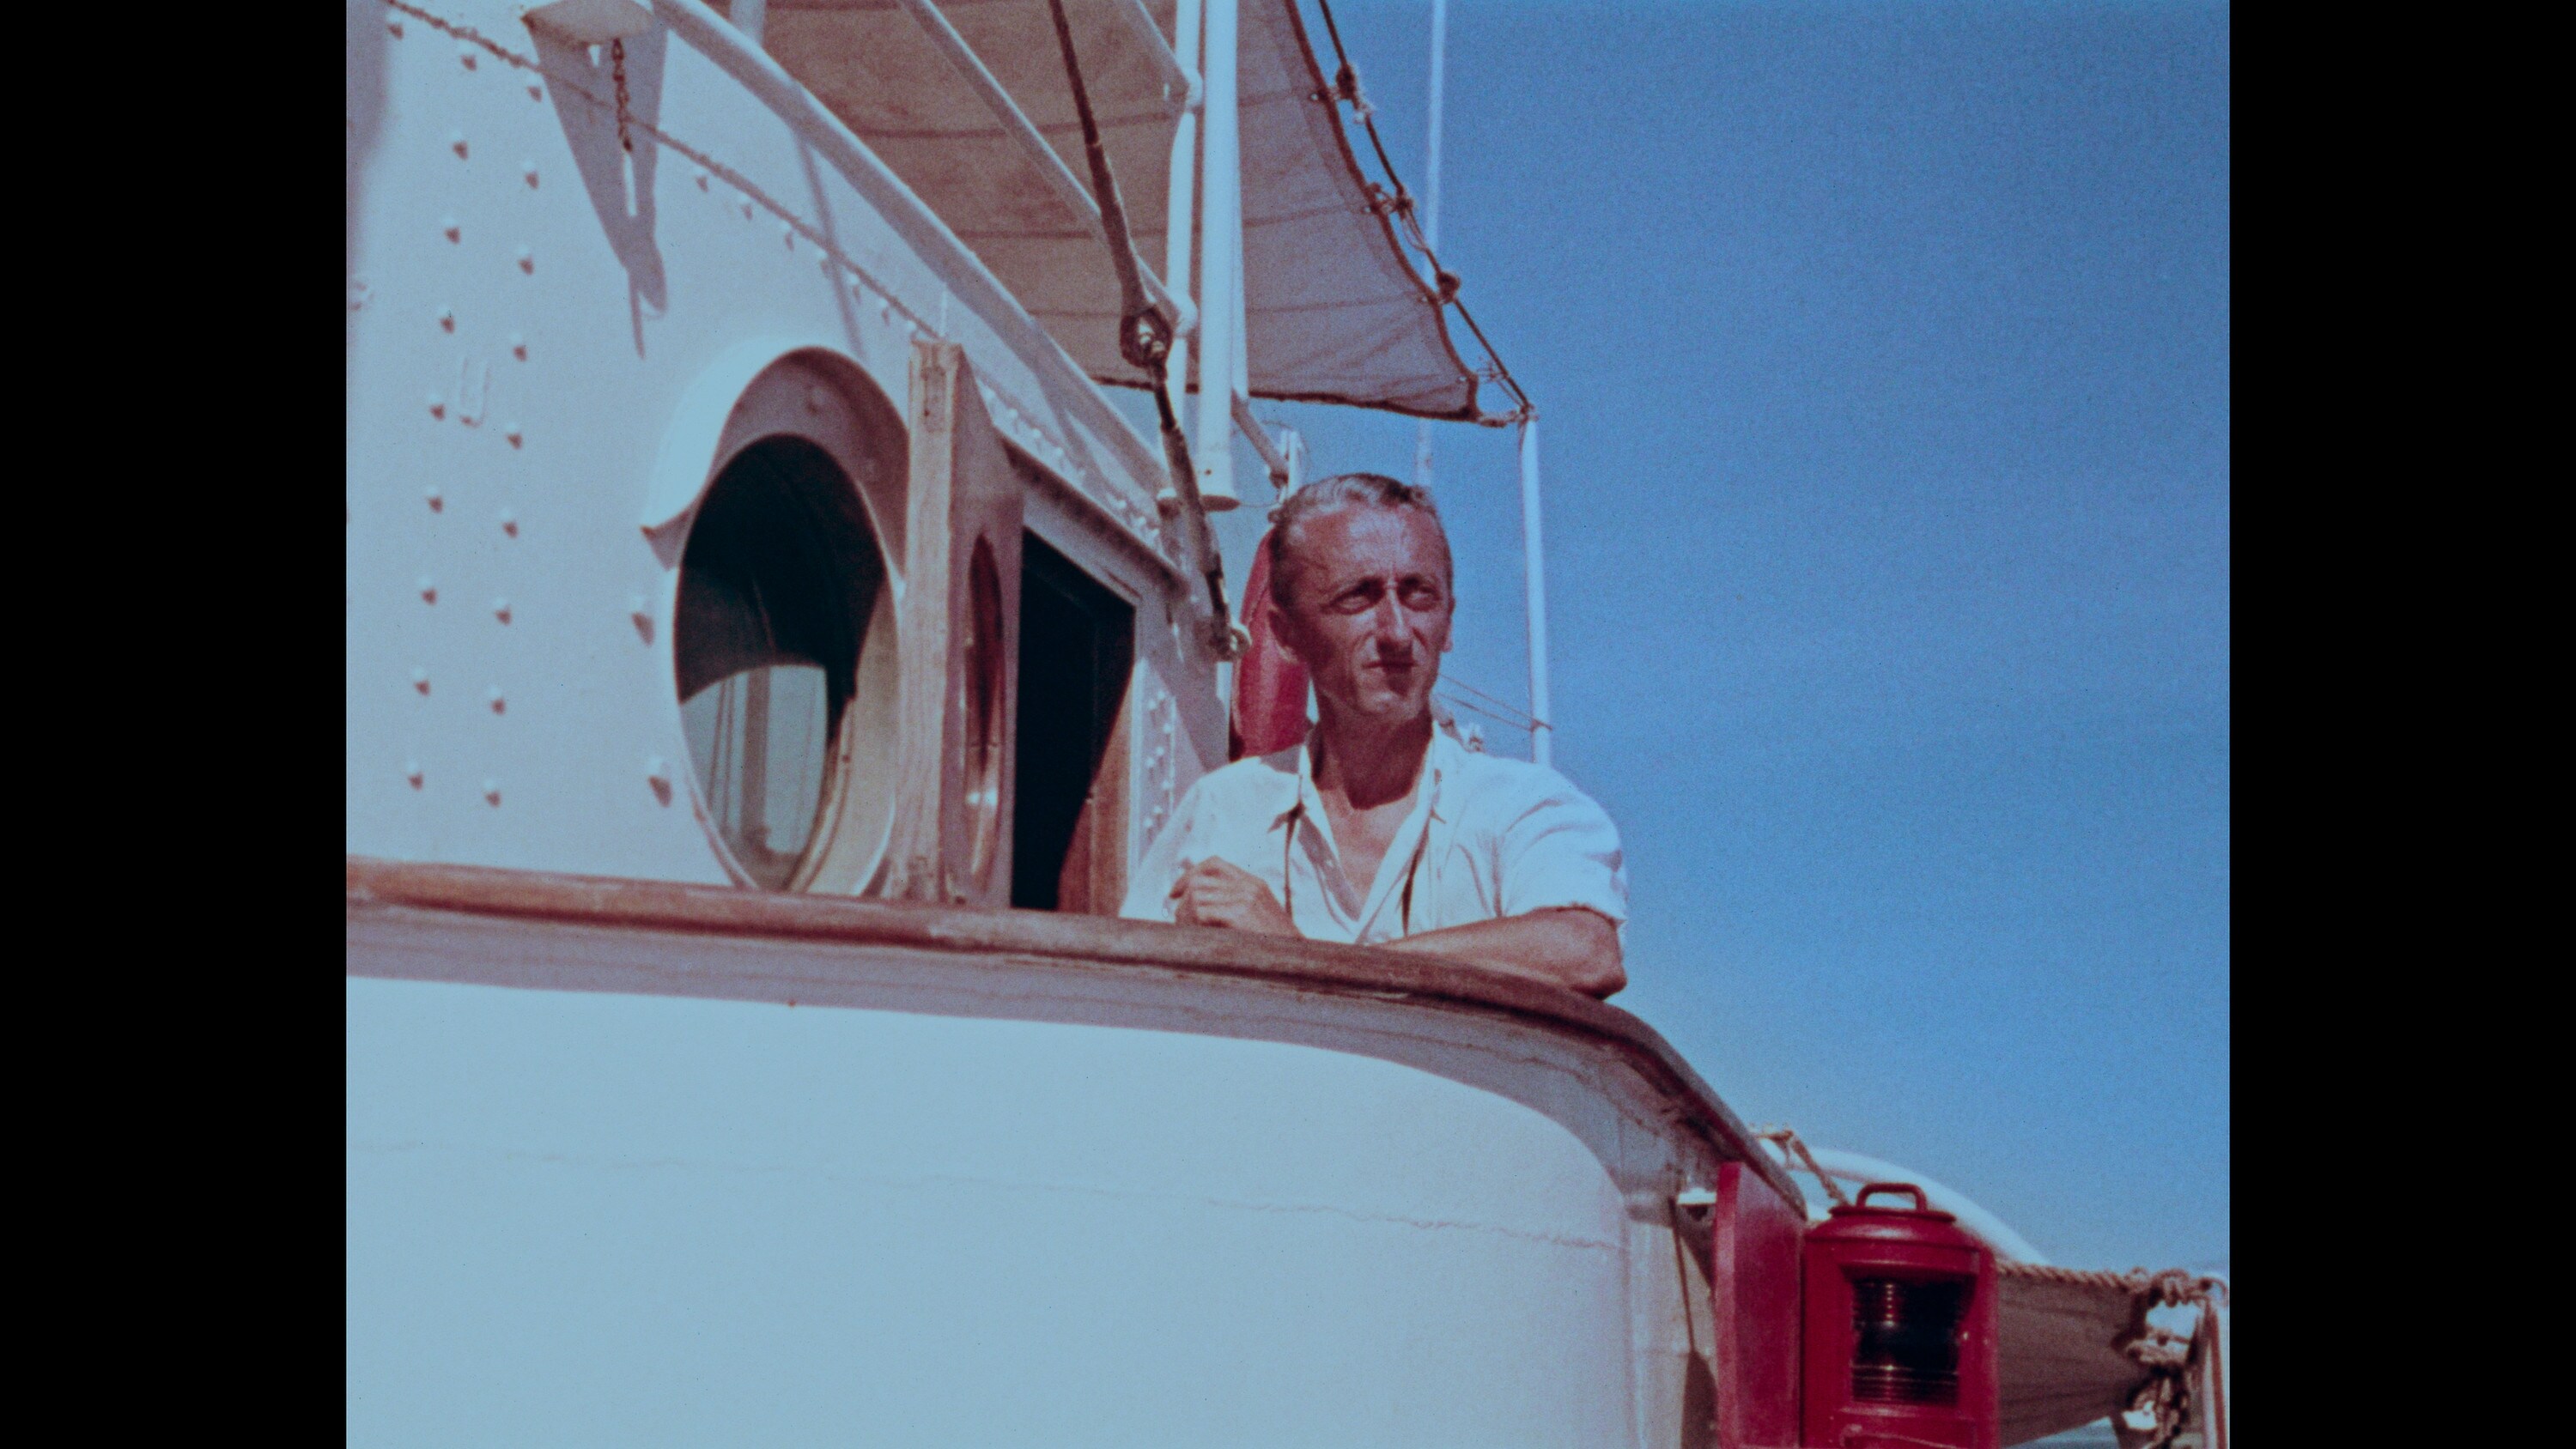 Jacques Cousteau aboard his ship Calypso. (Credit: The Cousteau Society)